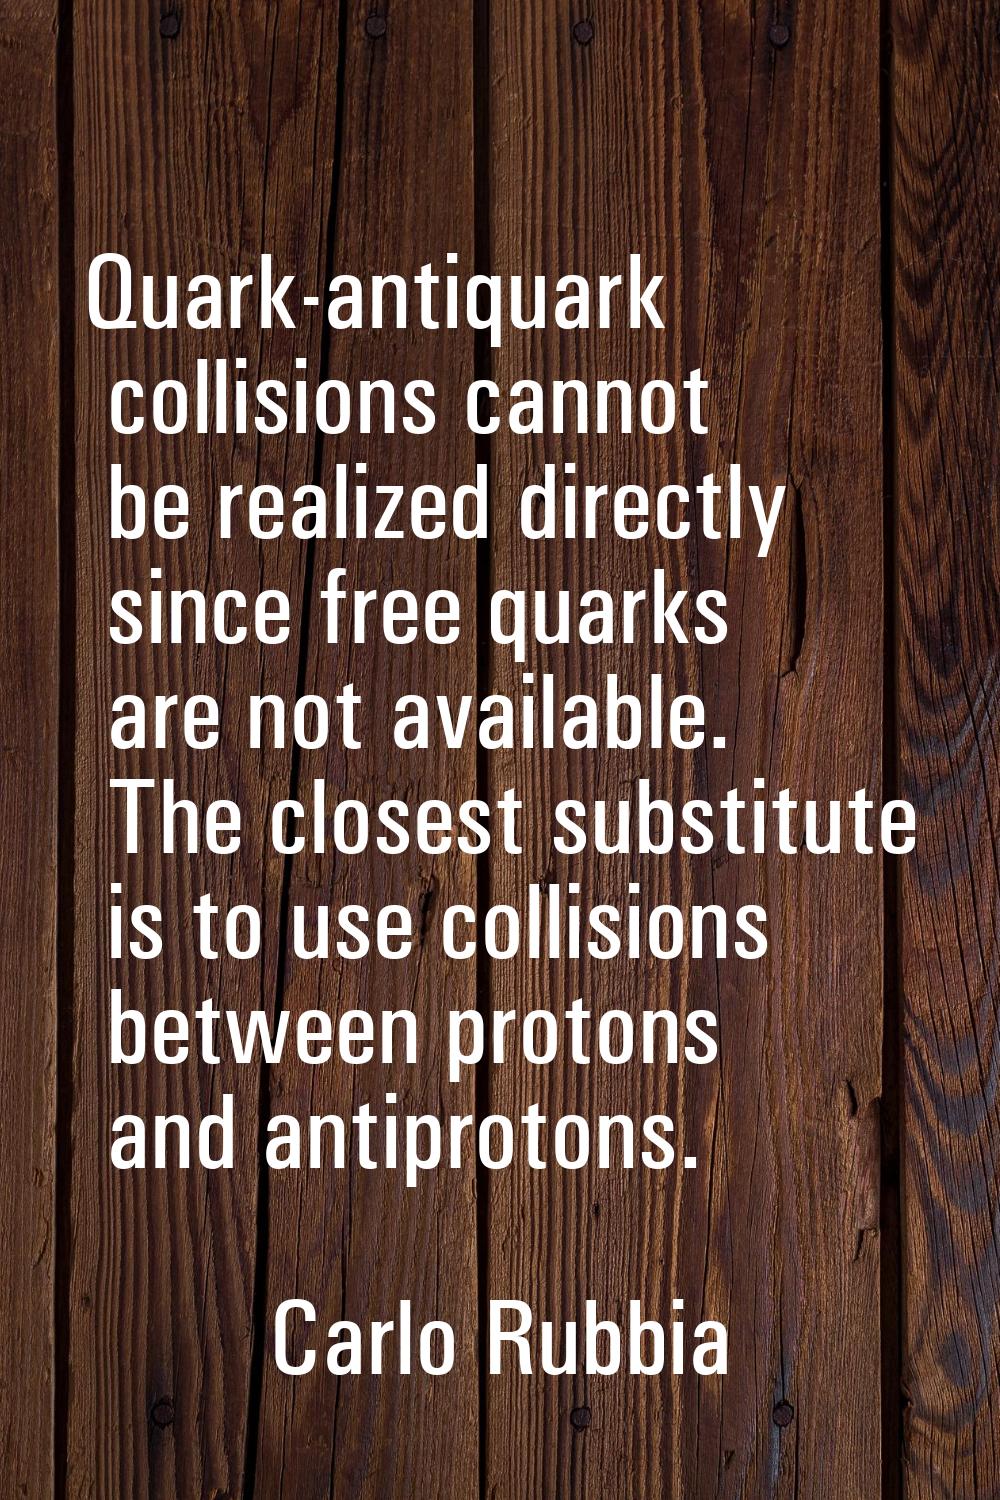 Quark-antiquark collisions cannot be realized directly since free quarks are not available. The clo